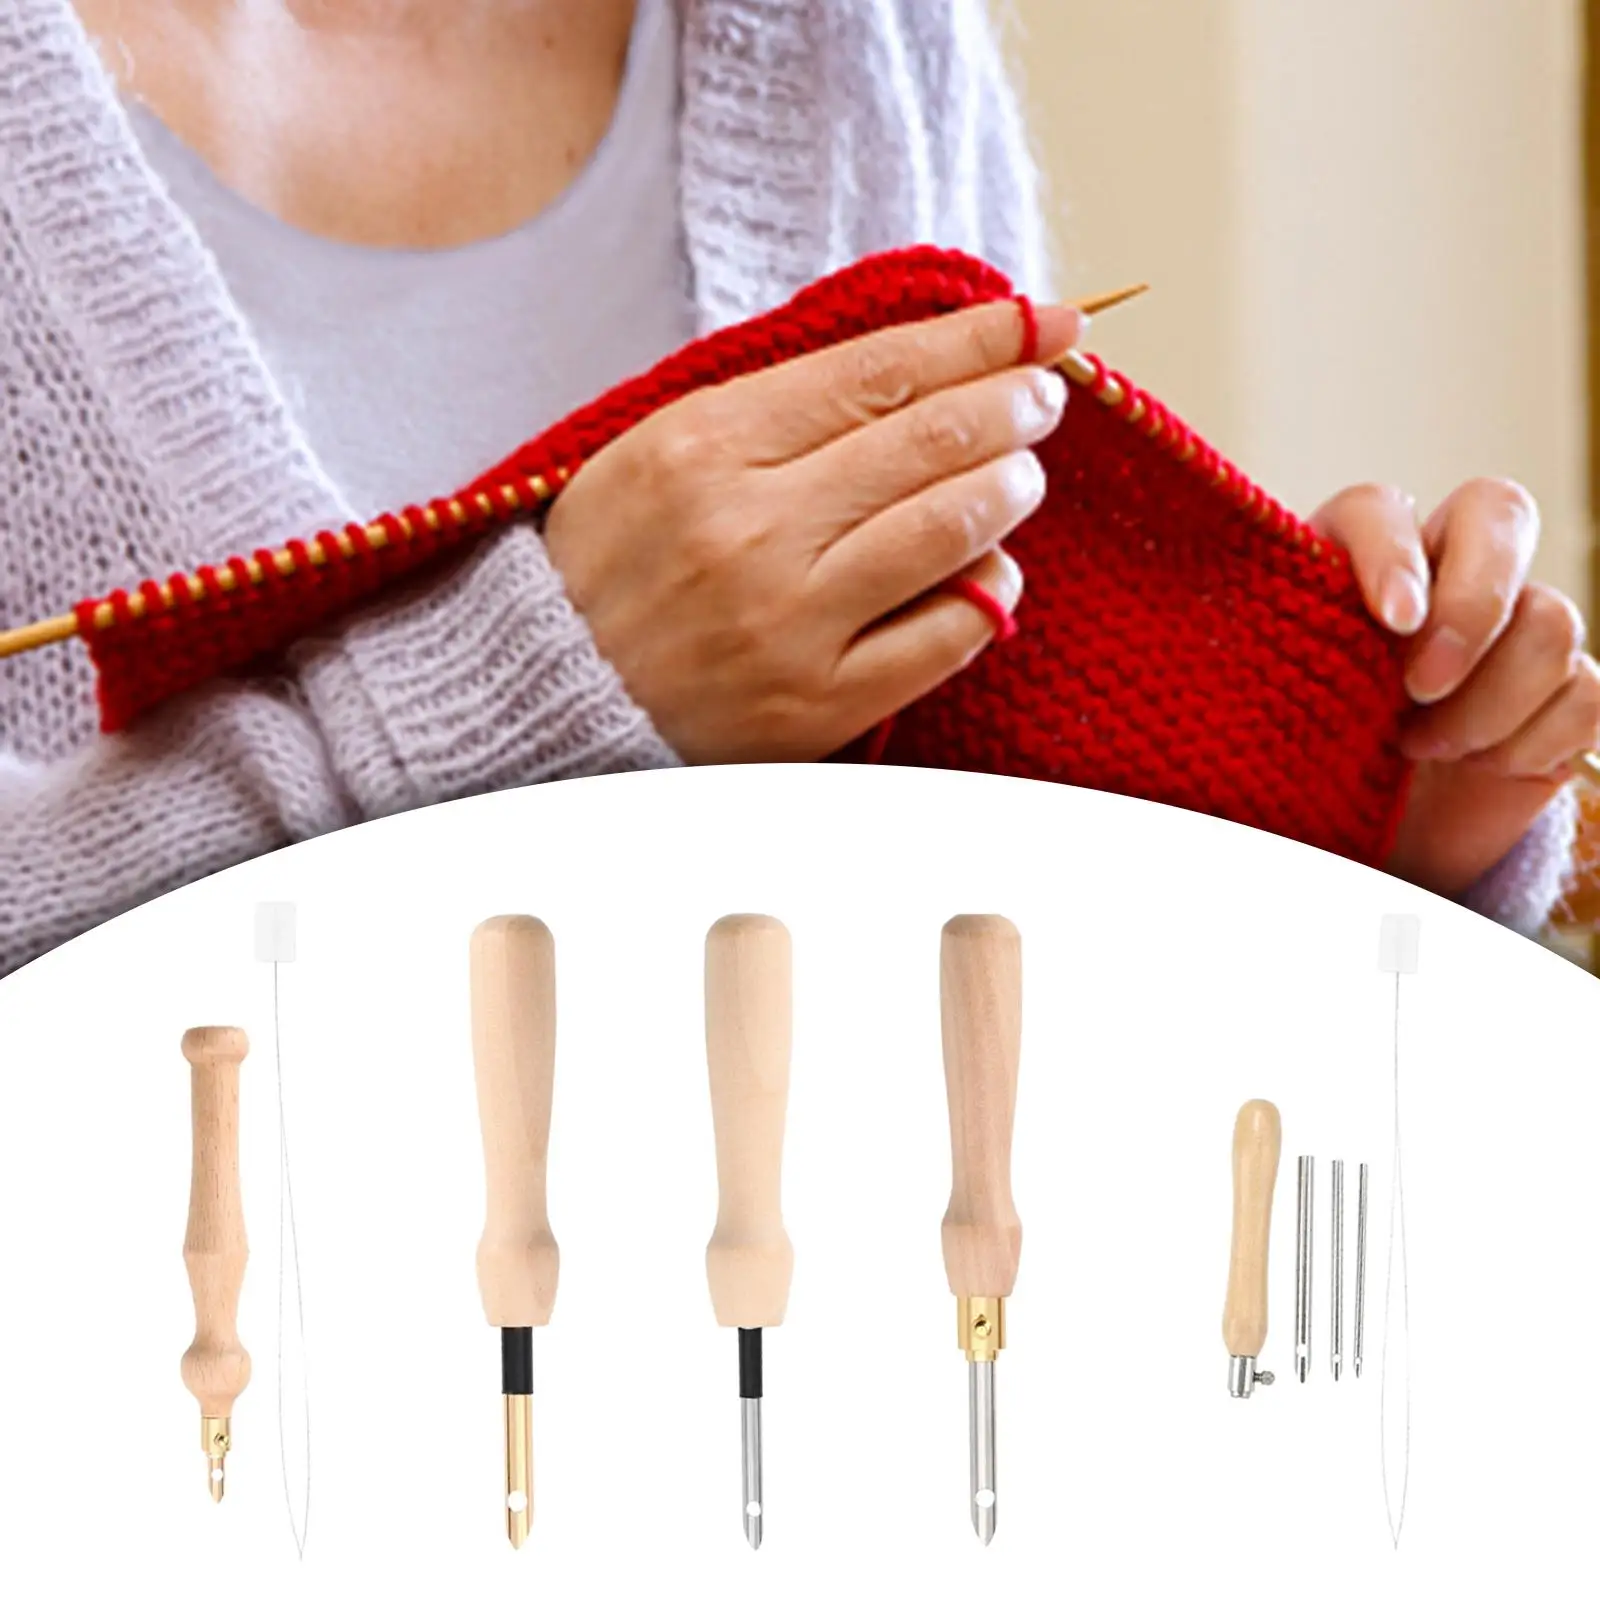 Punch Pin Adjustable Portable Cross Stitch Embroidery Punch Tool for Tapestry Rug Making DIY Handmade Art Crafts Weaving Sewing